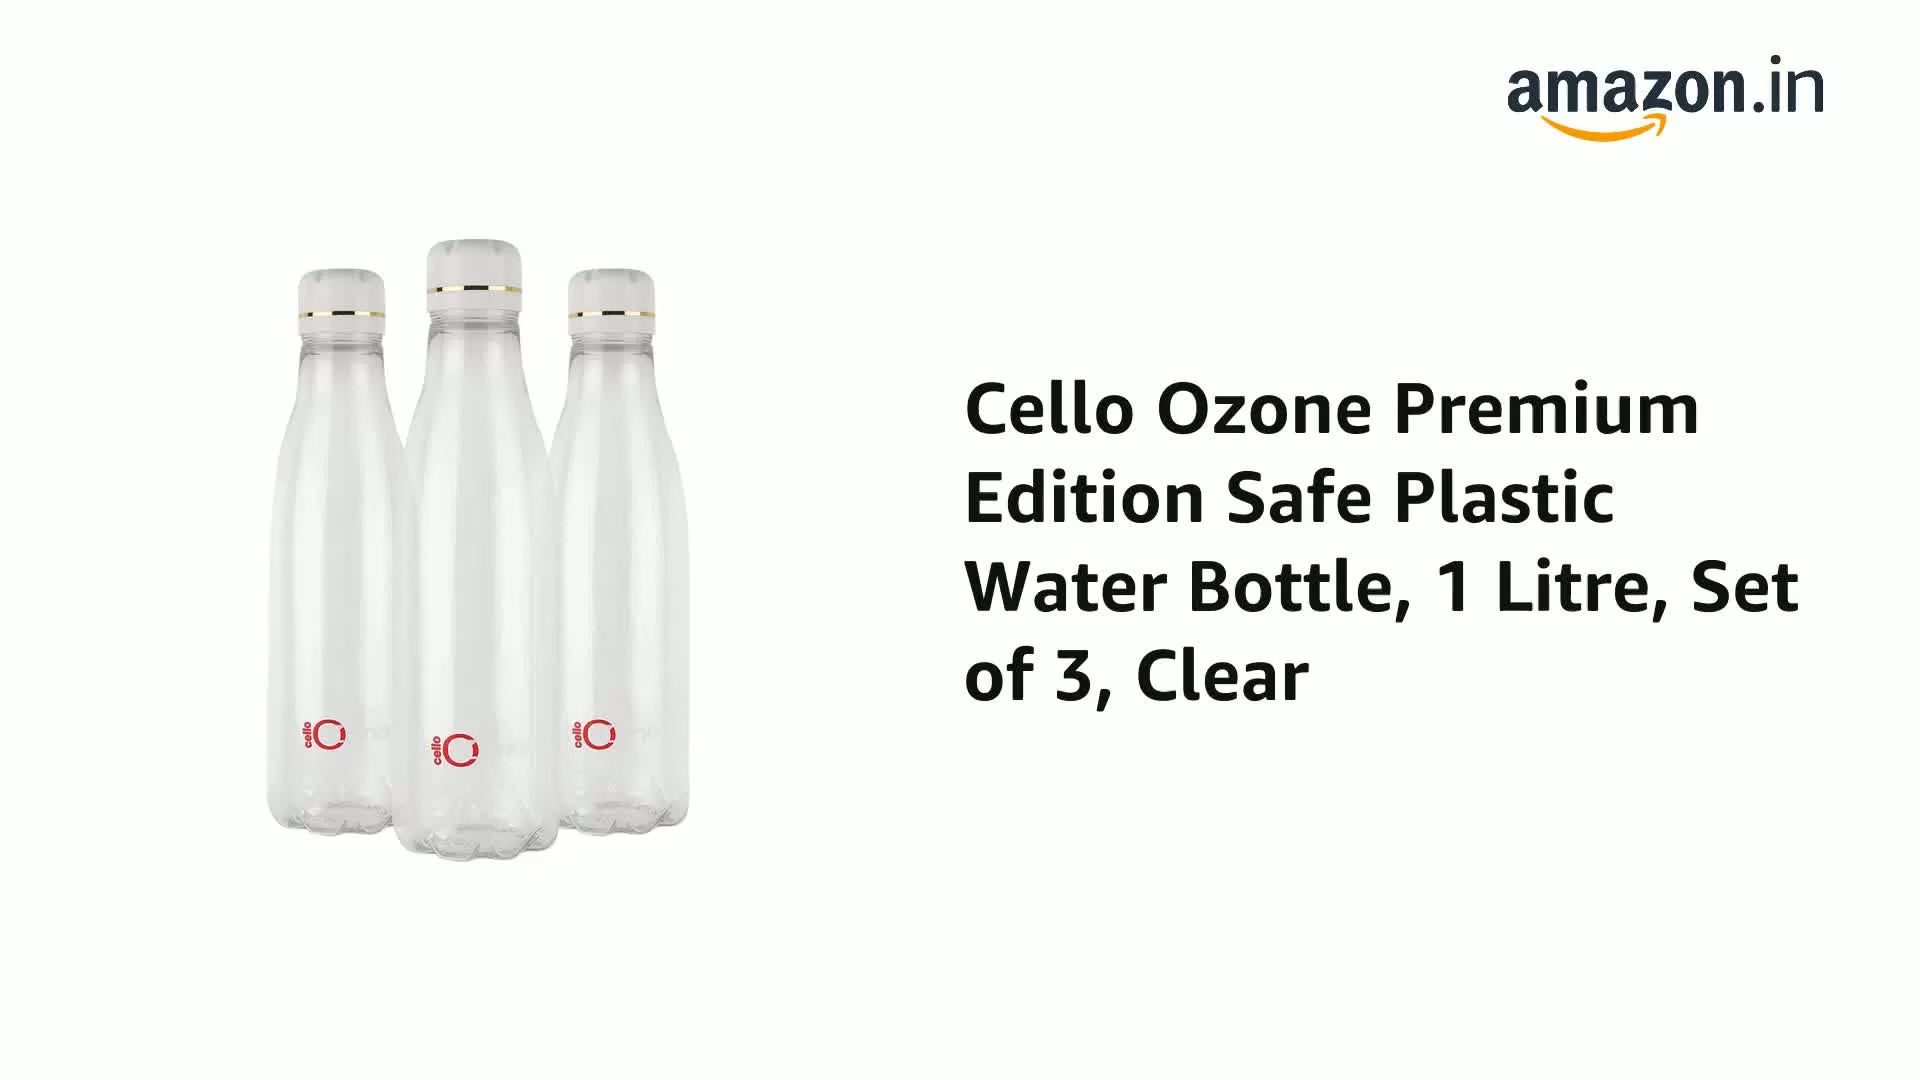 Cello Ozone Plastic Water Bottle 1000ml Set of 3 Clear, 2 image